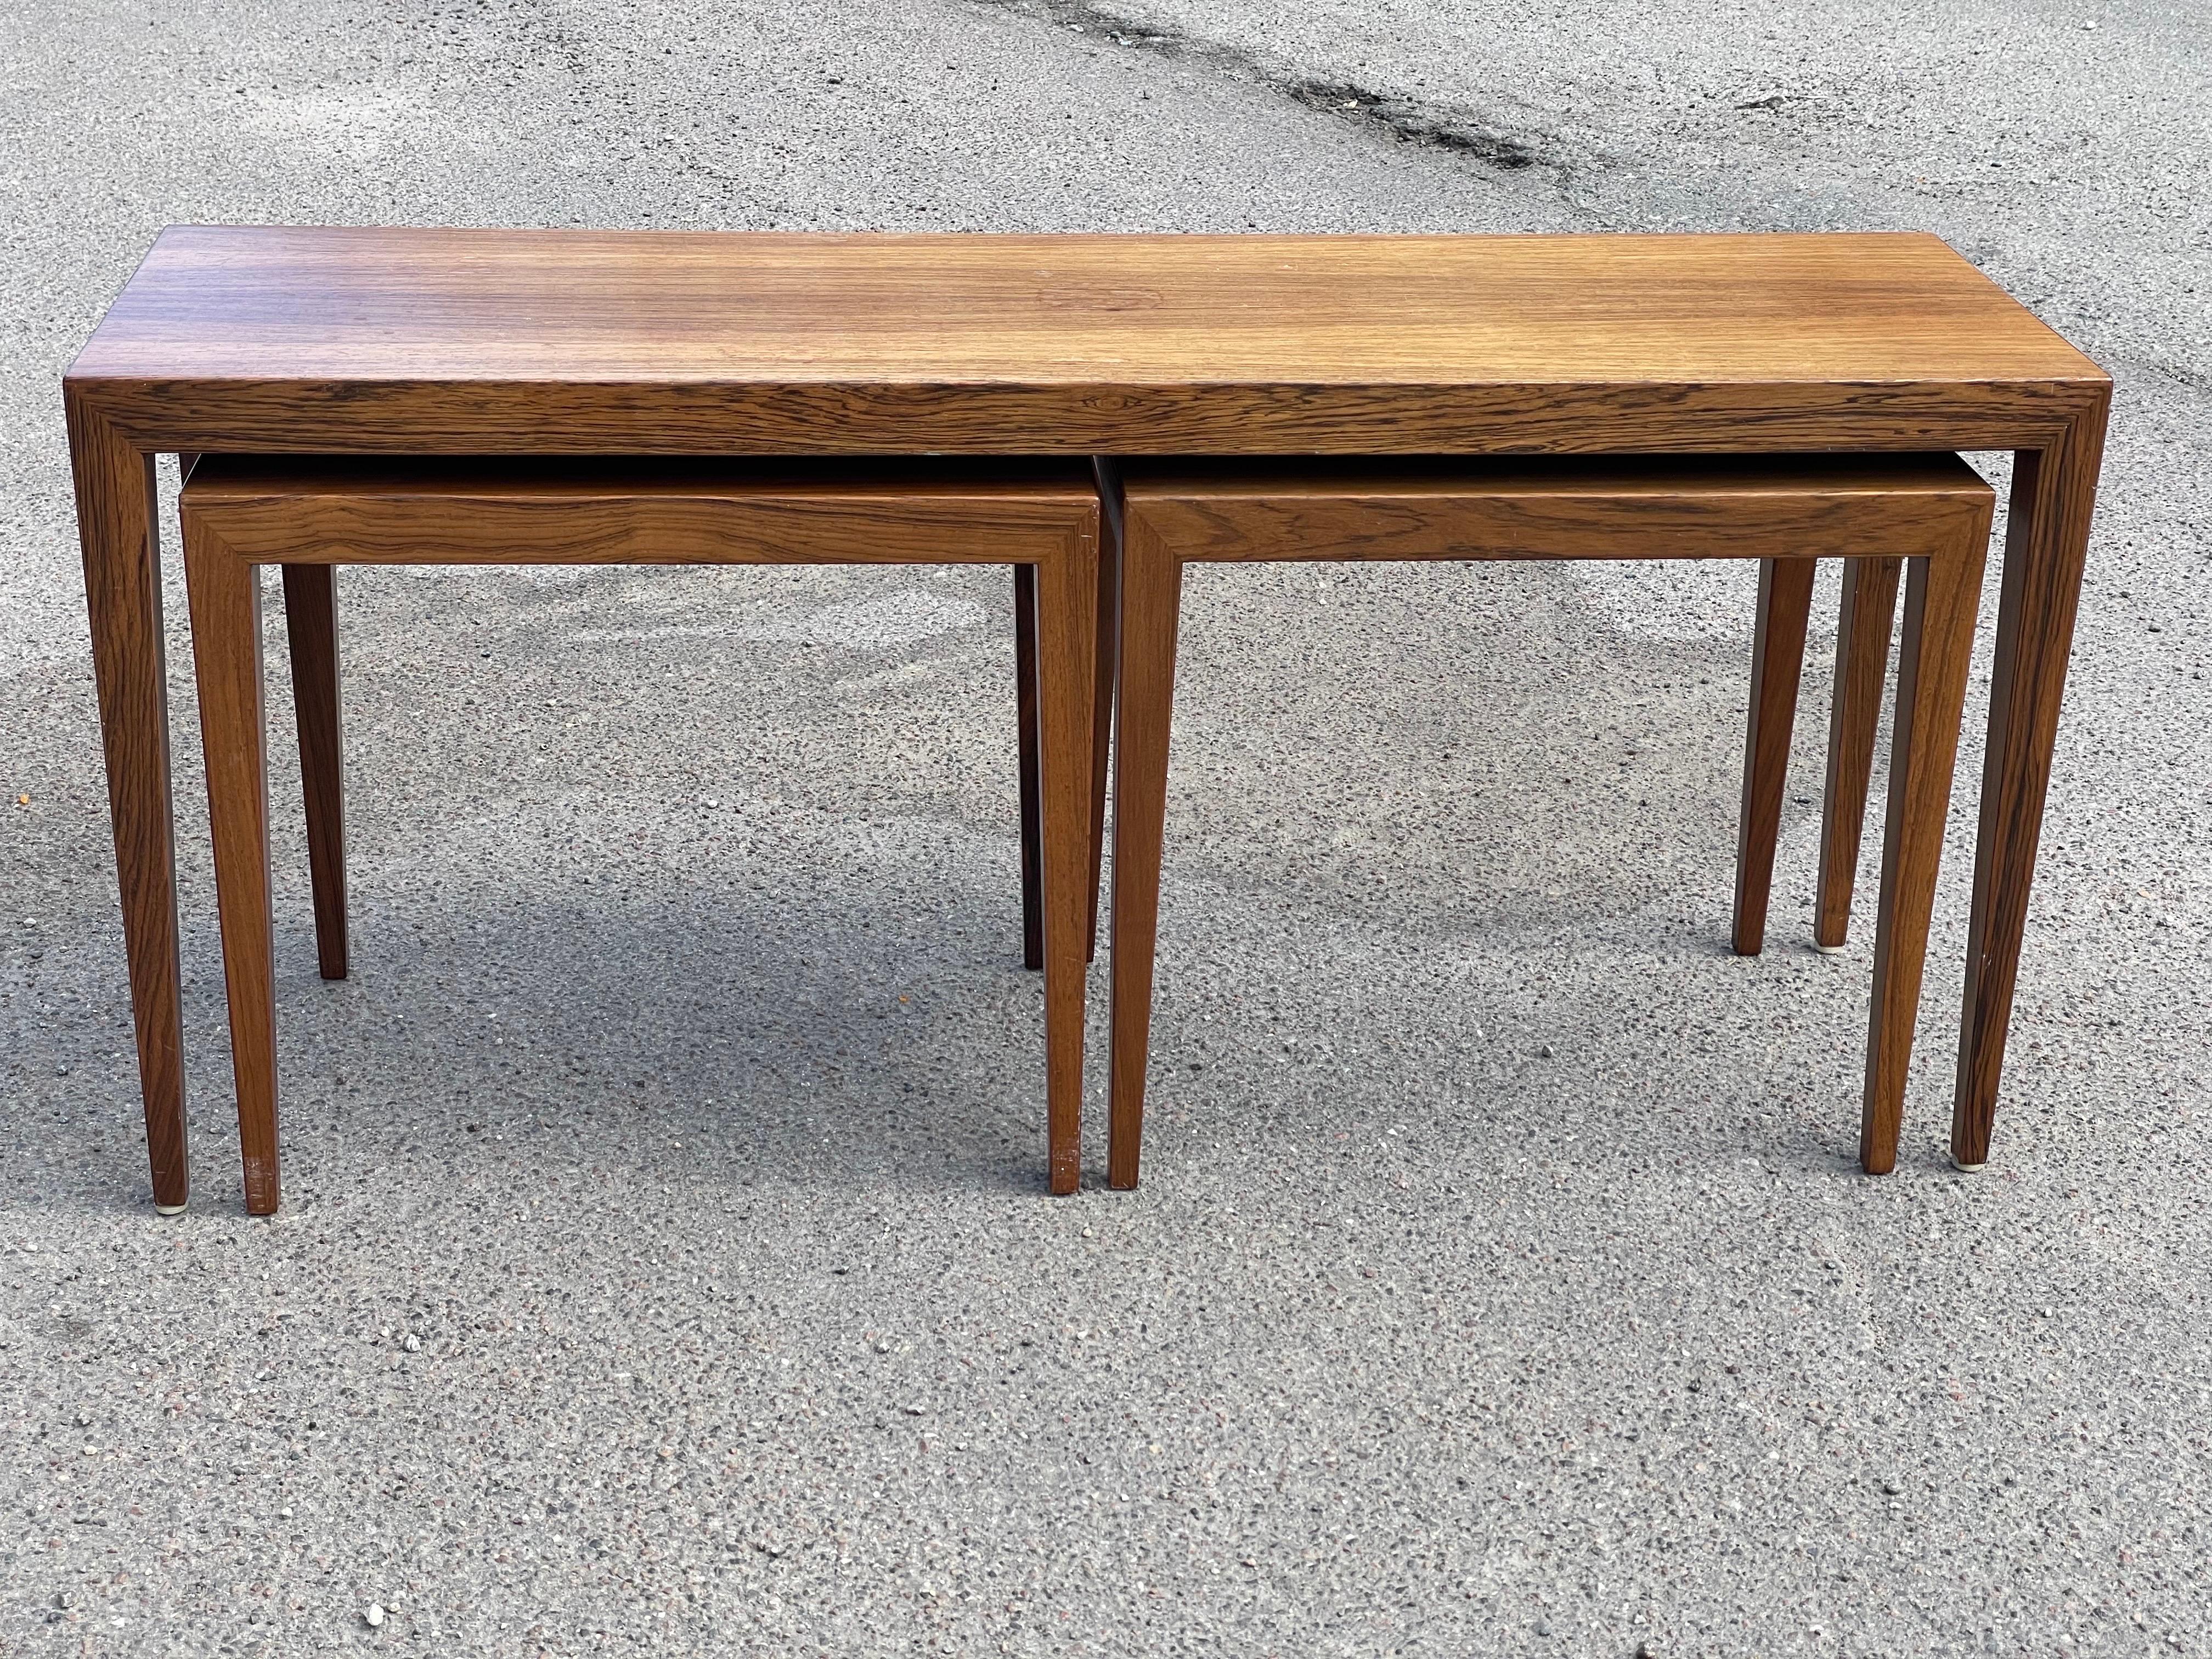 Introducing a rare gem - the Severin Hansen Mid-Century Modern Danish Nesting Tables Set, crafted in the 1960s. These exquisite tables are a testament to the impeccable craftsmanship of mid-century Danish design. The stunning dark wood finish and